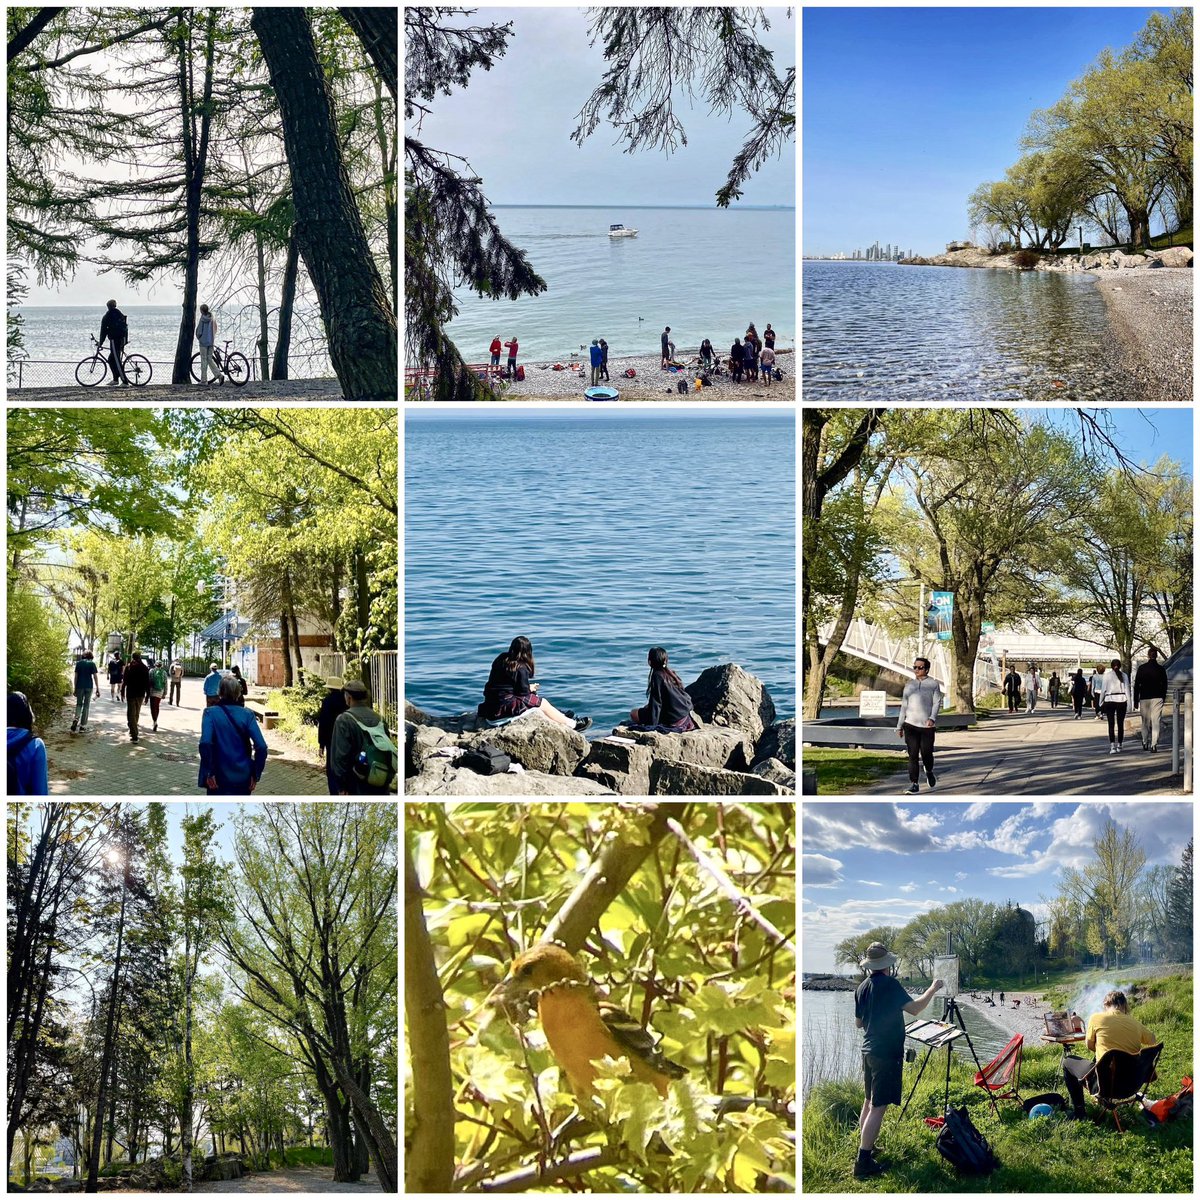 📍 West Island, Ontario Place | May 2023

The trees and the beach are still standing, but now the public are locked out. Next step in the works - destroy it all for a giant glass @ThermeGroup box and parking garage.

It’s not too late to change course ontarioplaceforall.com/takeaction/